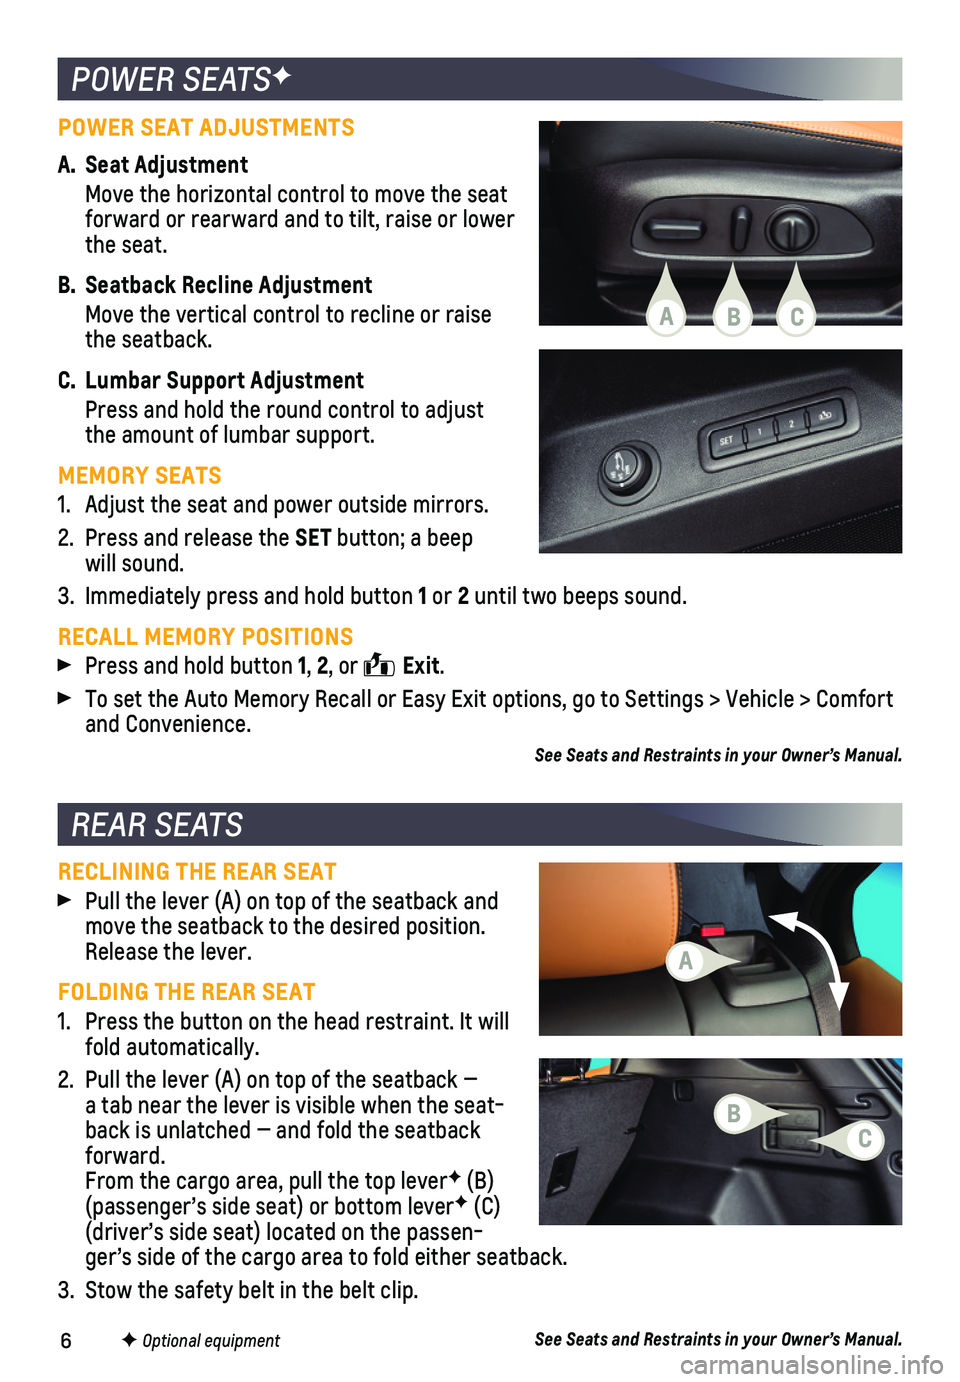 CHEVROLET EQUINOX 2018  Get To Know Guide 6F Optional equipment
POWER SEAT ADJUSTMENTS
A. Seat Adjustment
 Move the horizontal control to move the seat forward or rearward and to tilt, raise or lower the seat.
B. Seatback Recline Adjustment
 